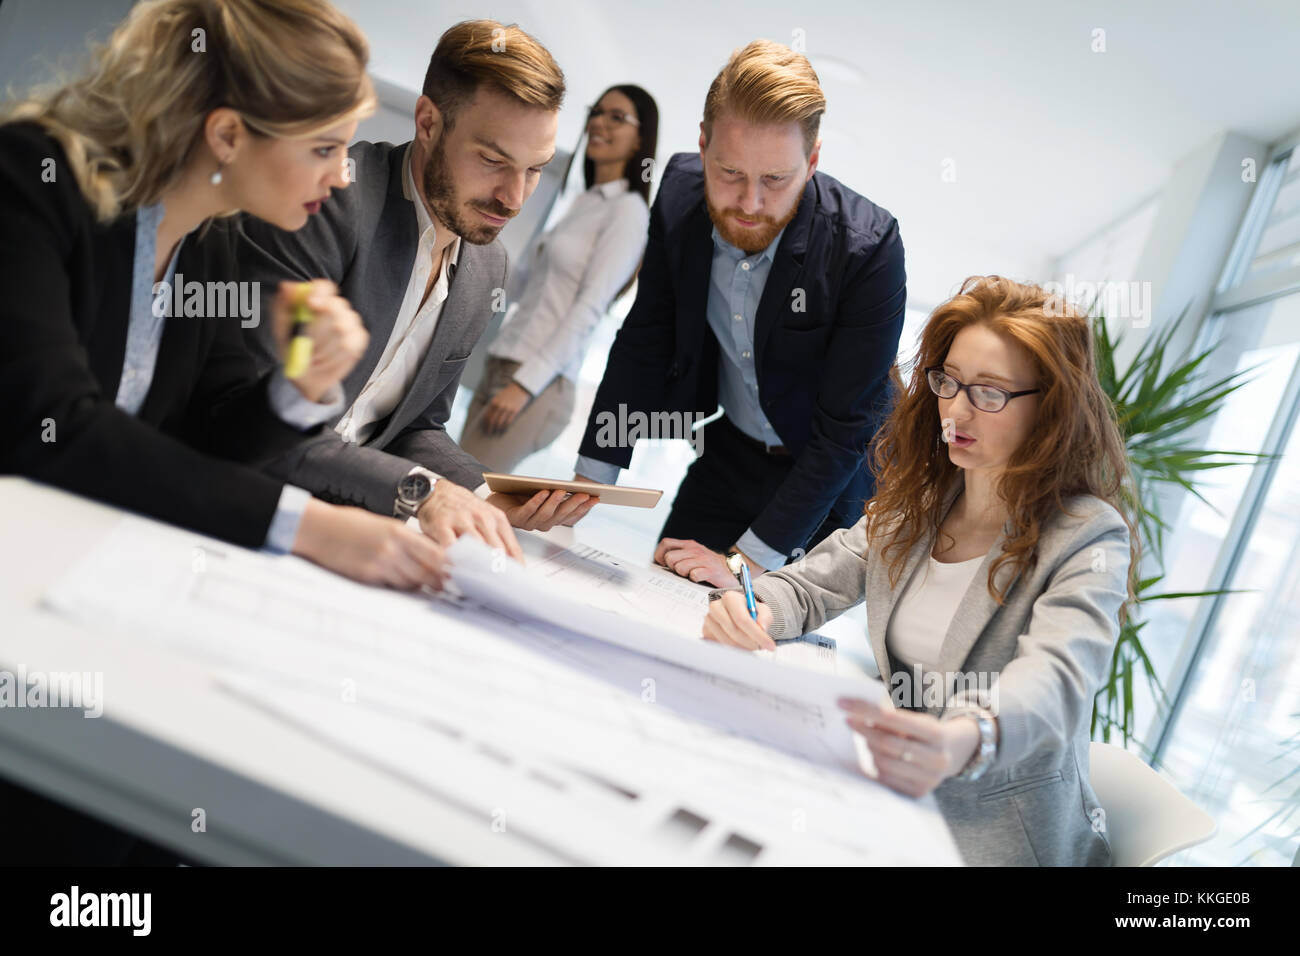 Team of architects working together on project Stock Photo